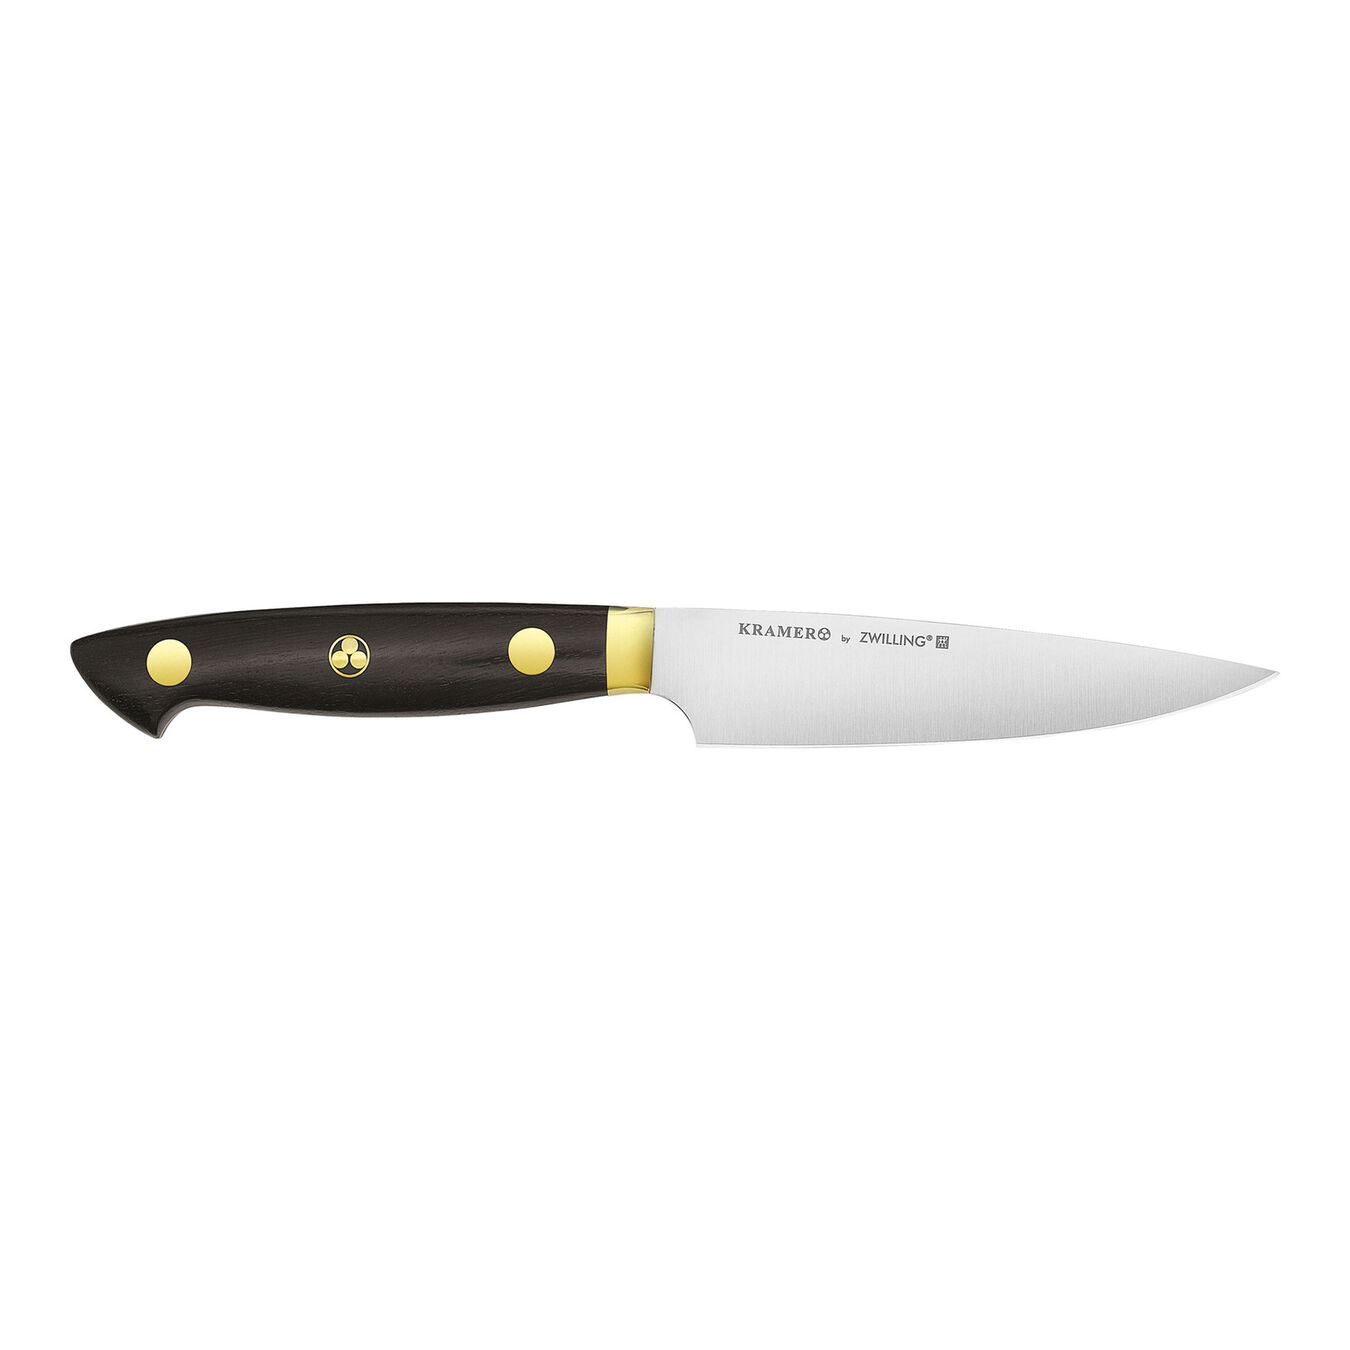 5 inch Utility knife - Visual Imperfections,,large 1